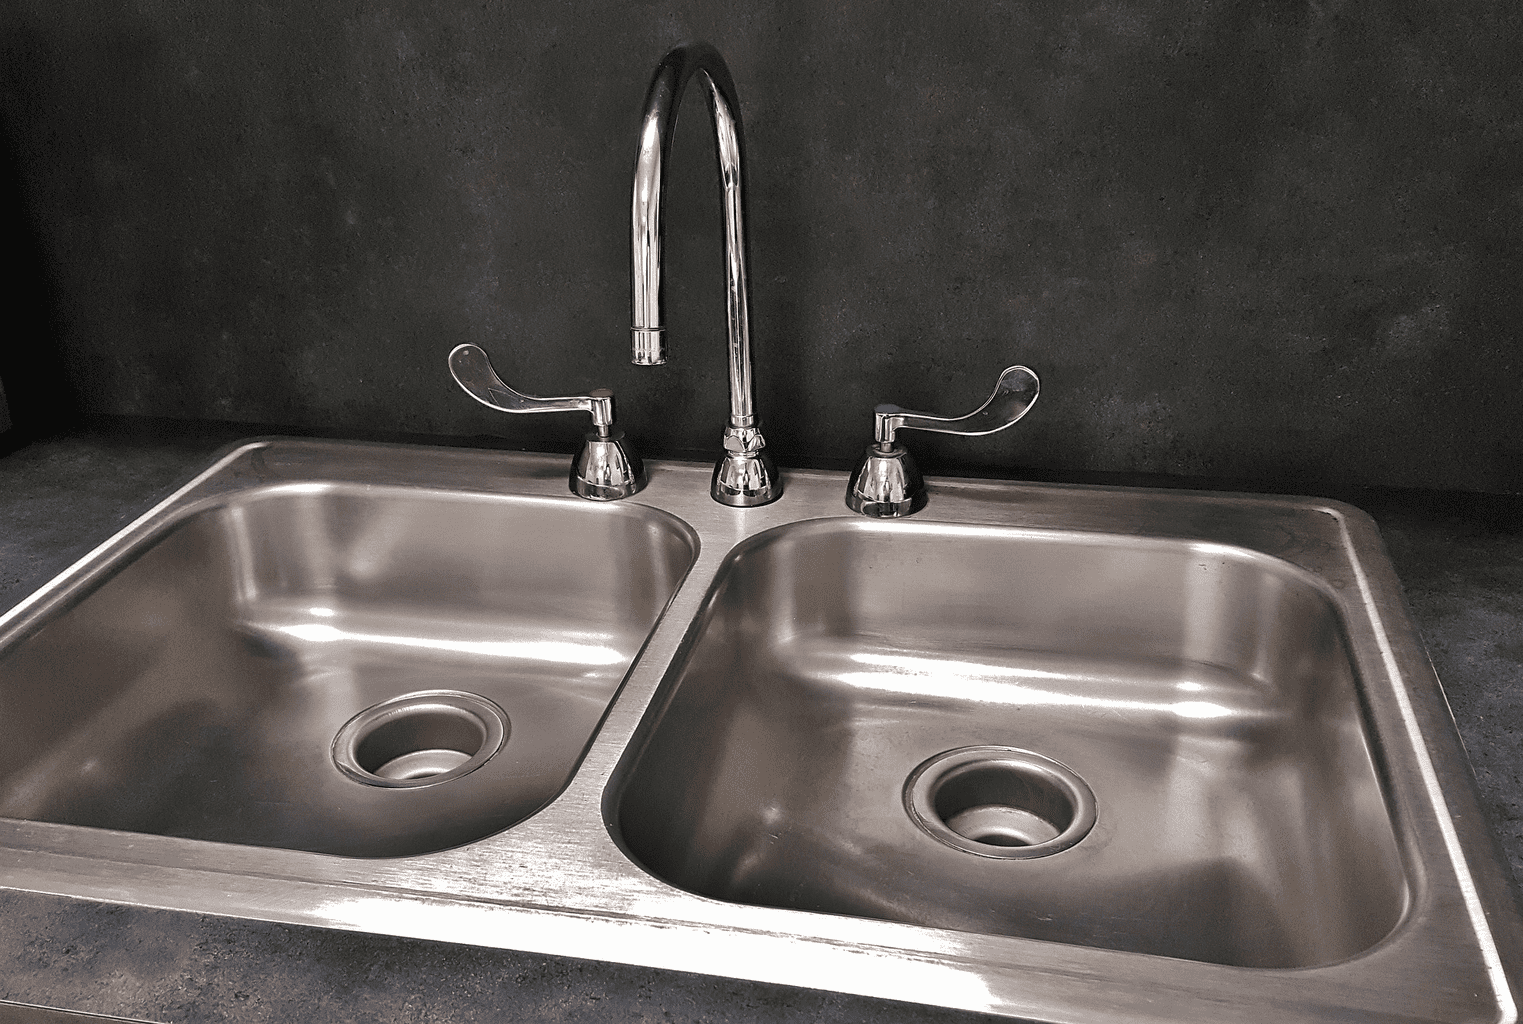 If you have issues with the p trap of your sink, it will allow sewer smells to access your home